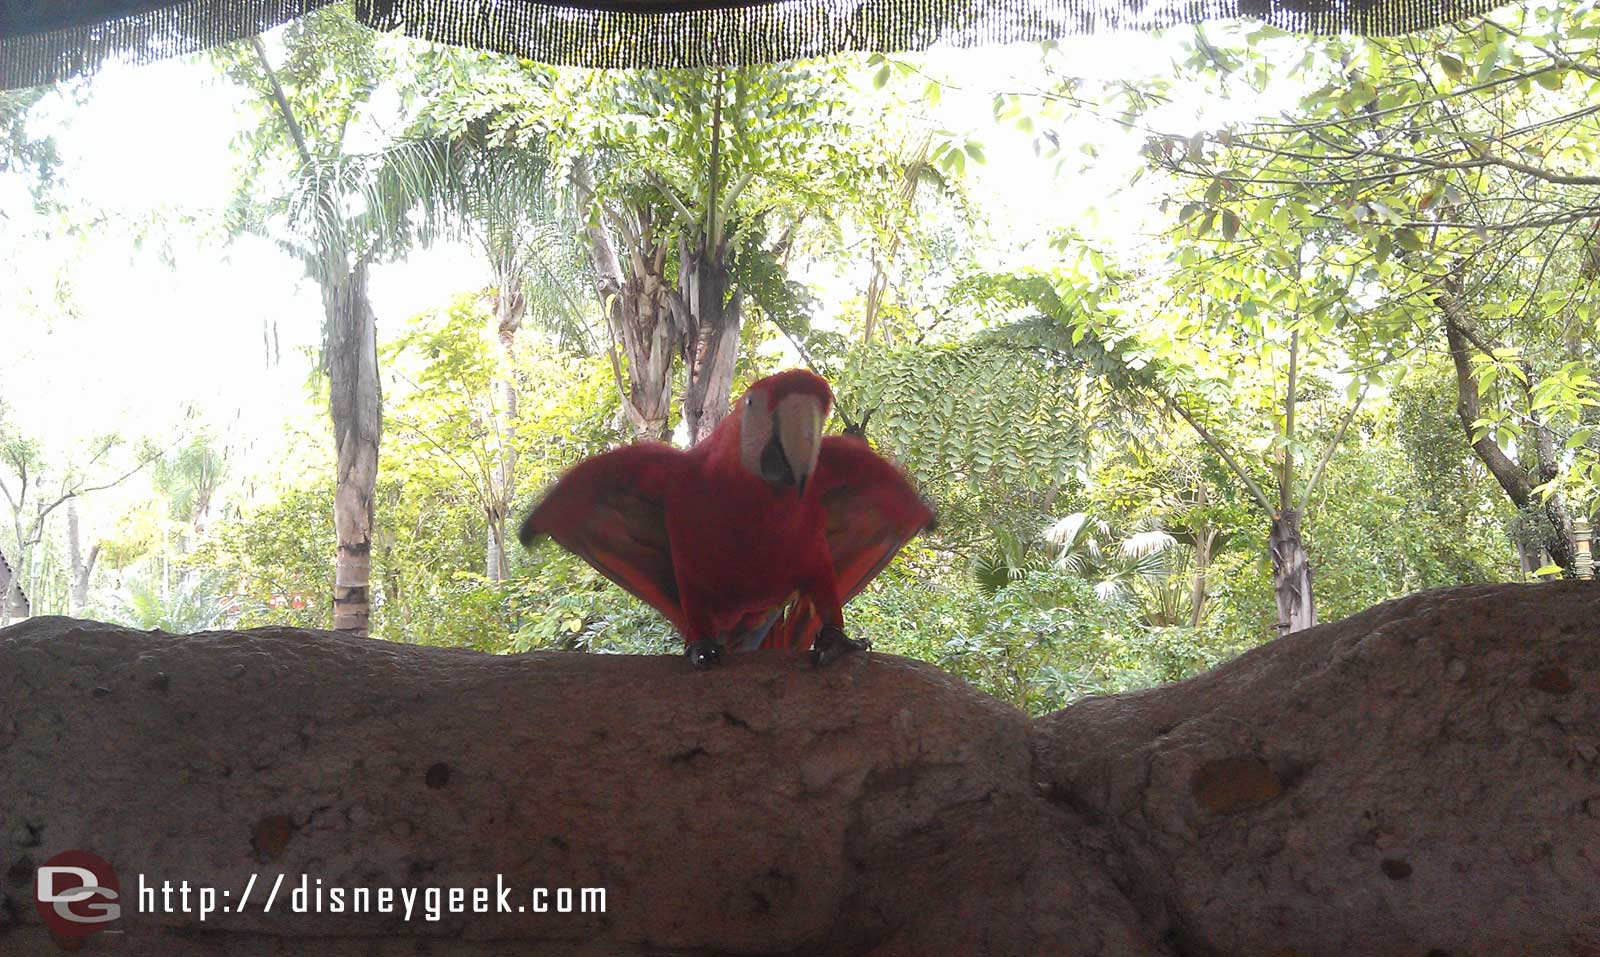 Next up Flights of Wonder a macaw out for a preshow DAK15